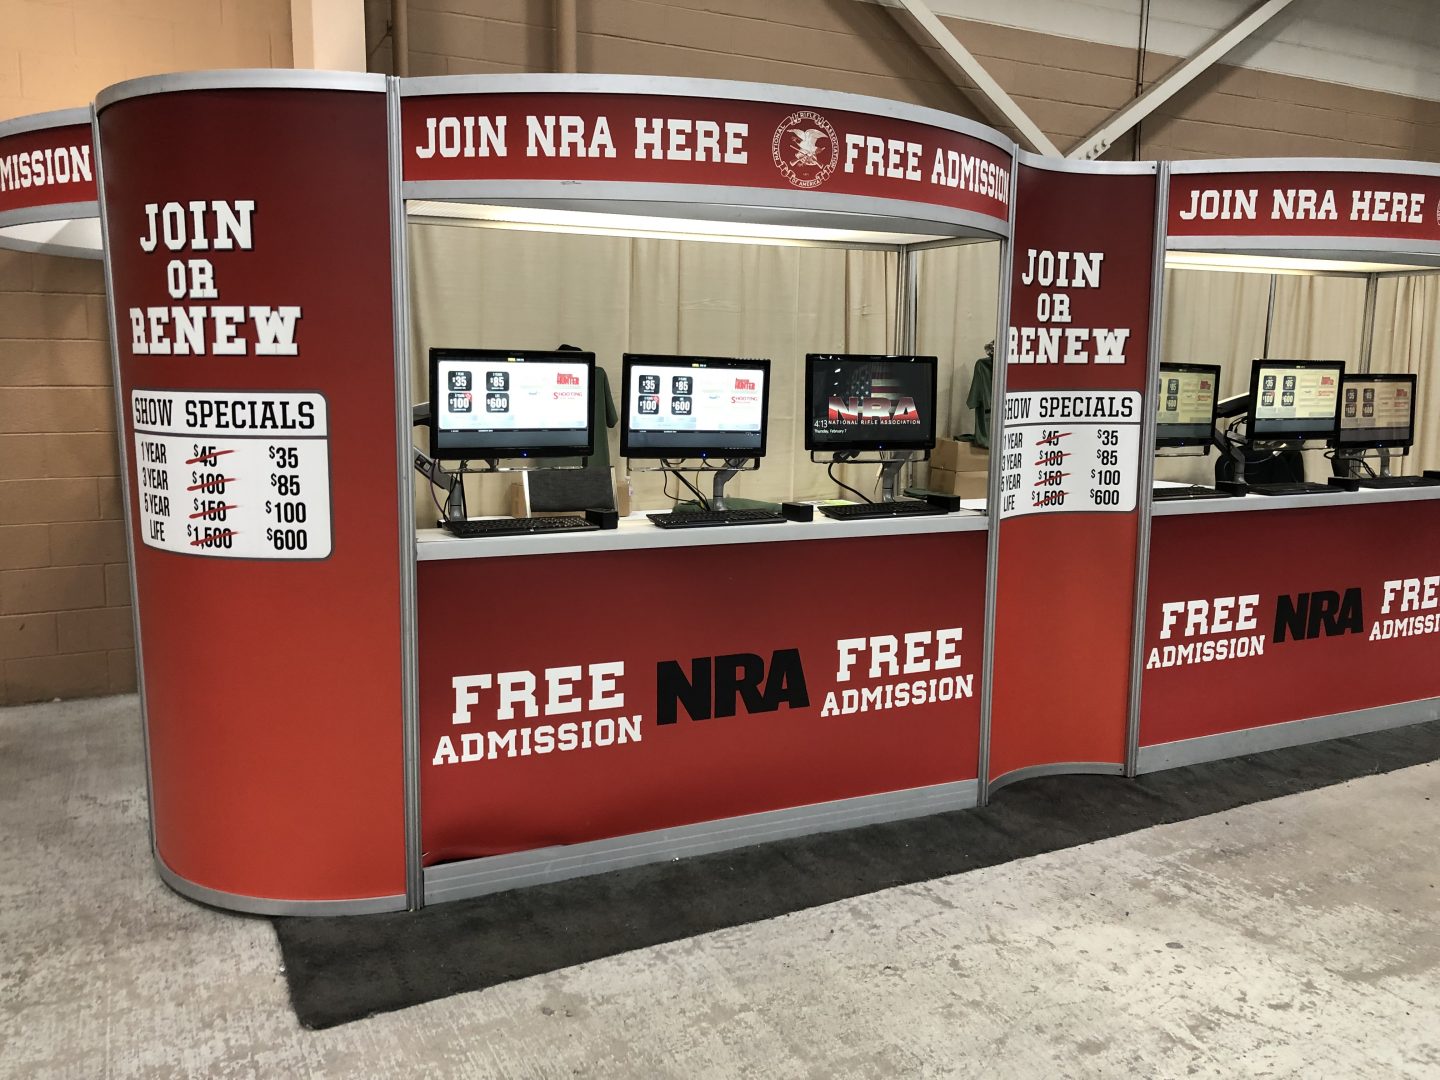 A booth at the Great American Outdoor Show in Harrisburg is seen on Feb. 7, 2019. The NRA offers free admission to the show for people who join or renew their membership.